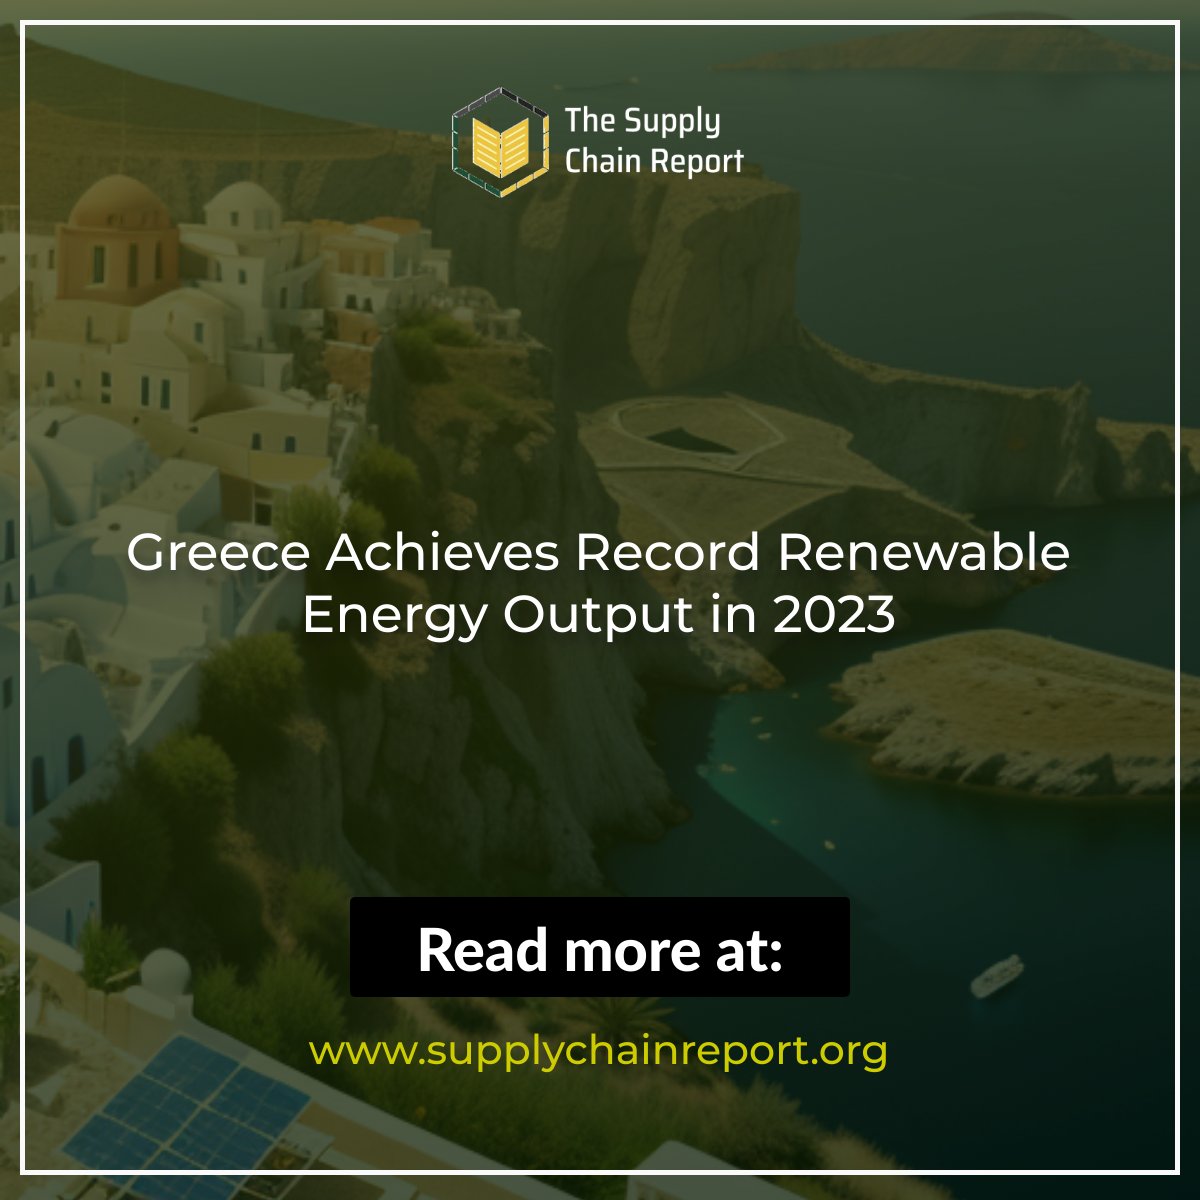 Greece Achieves Record Renewable Energy Output in 2023
Read more here: supplychainreport.org/greece-achieve…
#TheSupplyChainReport #greece #renewableenergy #sustainablefuture #2030goals